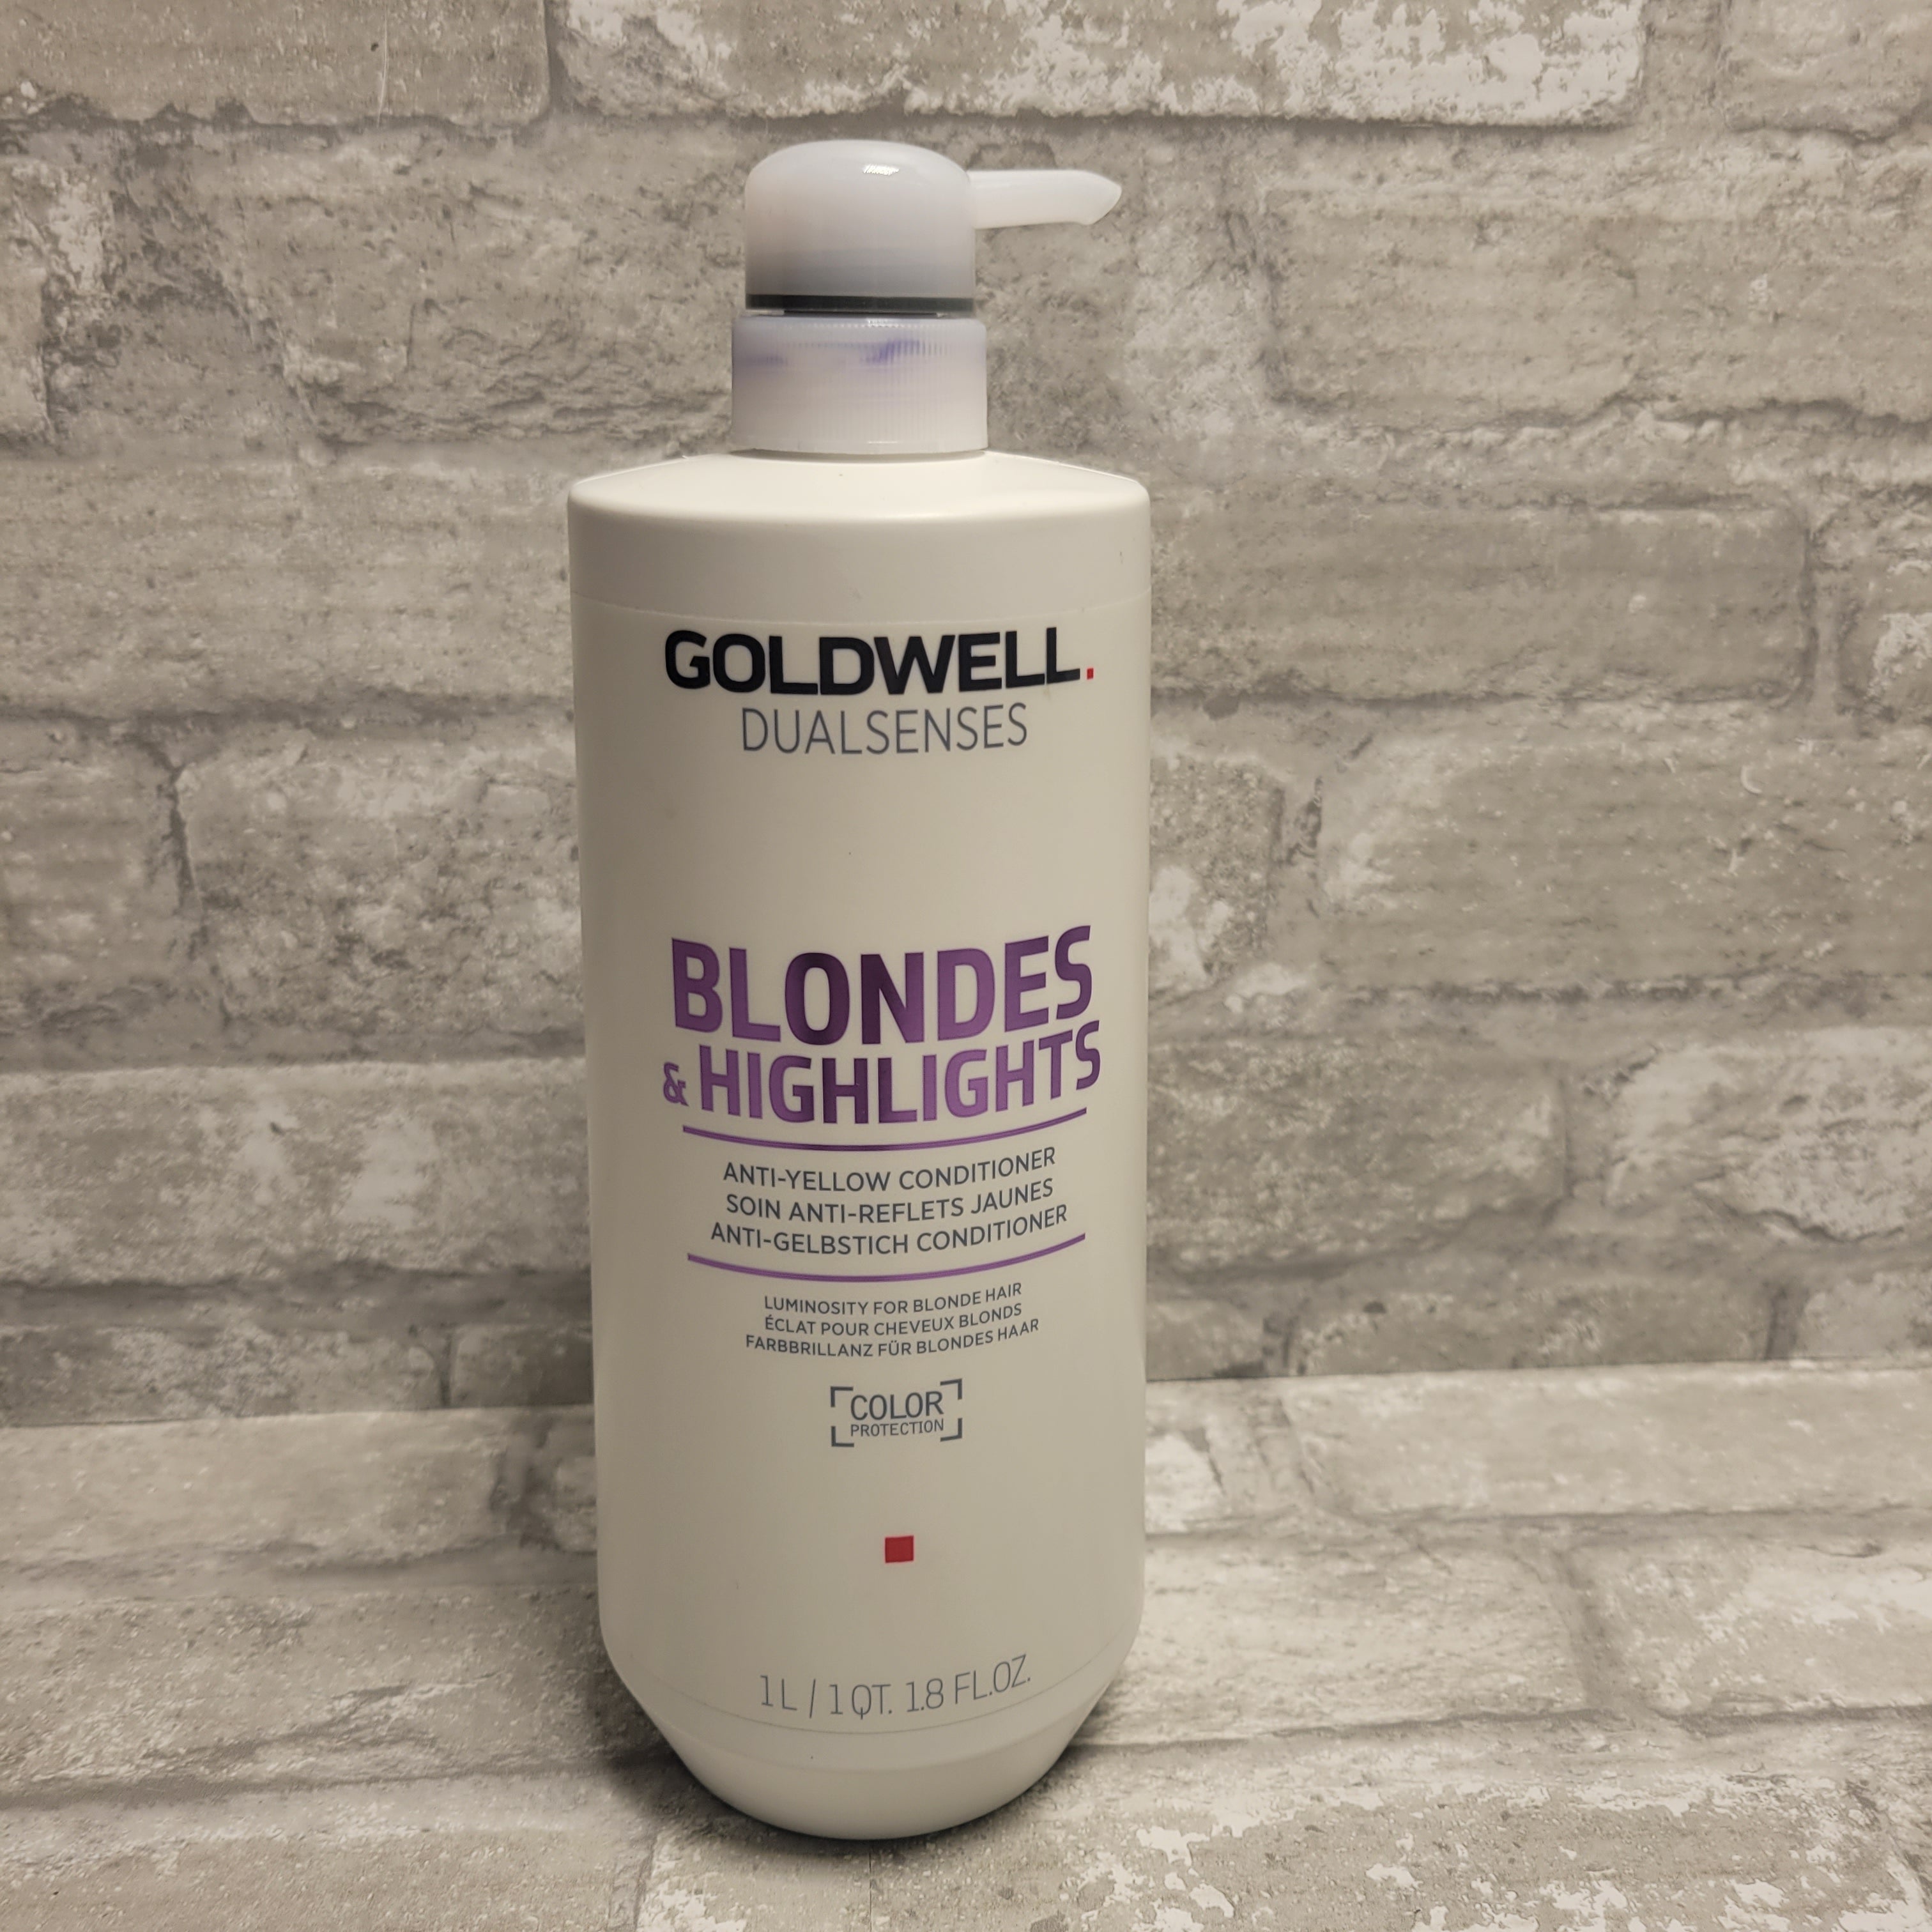 Goldwell Dualsenses Blondes & Highlights Anti-Yellow Conditioner 33.8 oz (8070401753326)